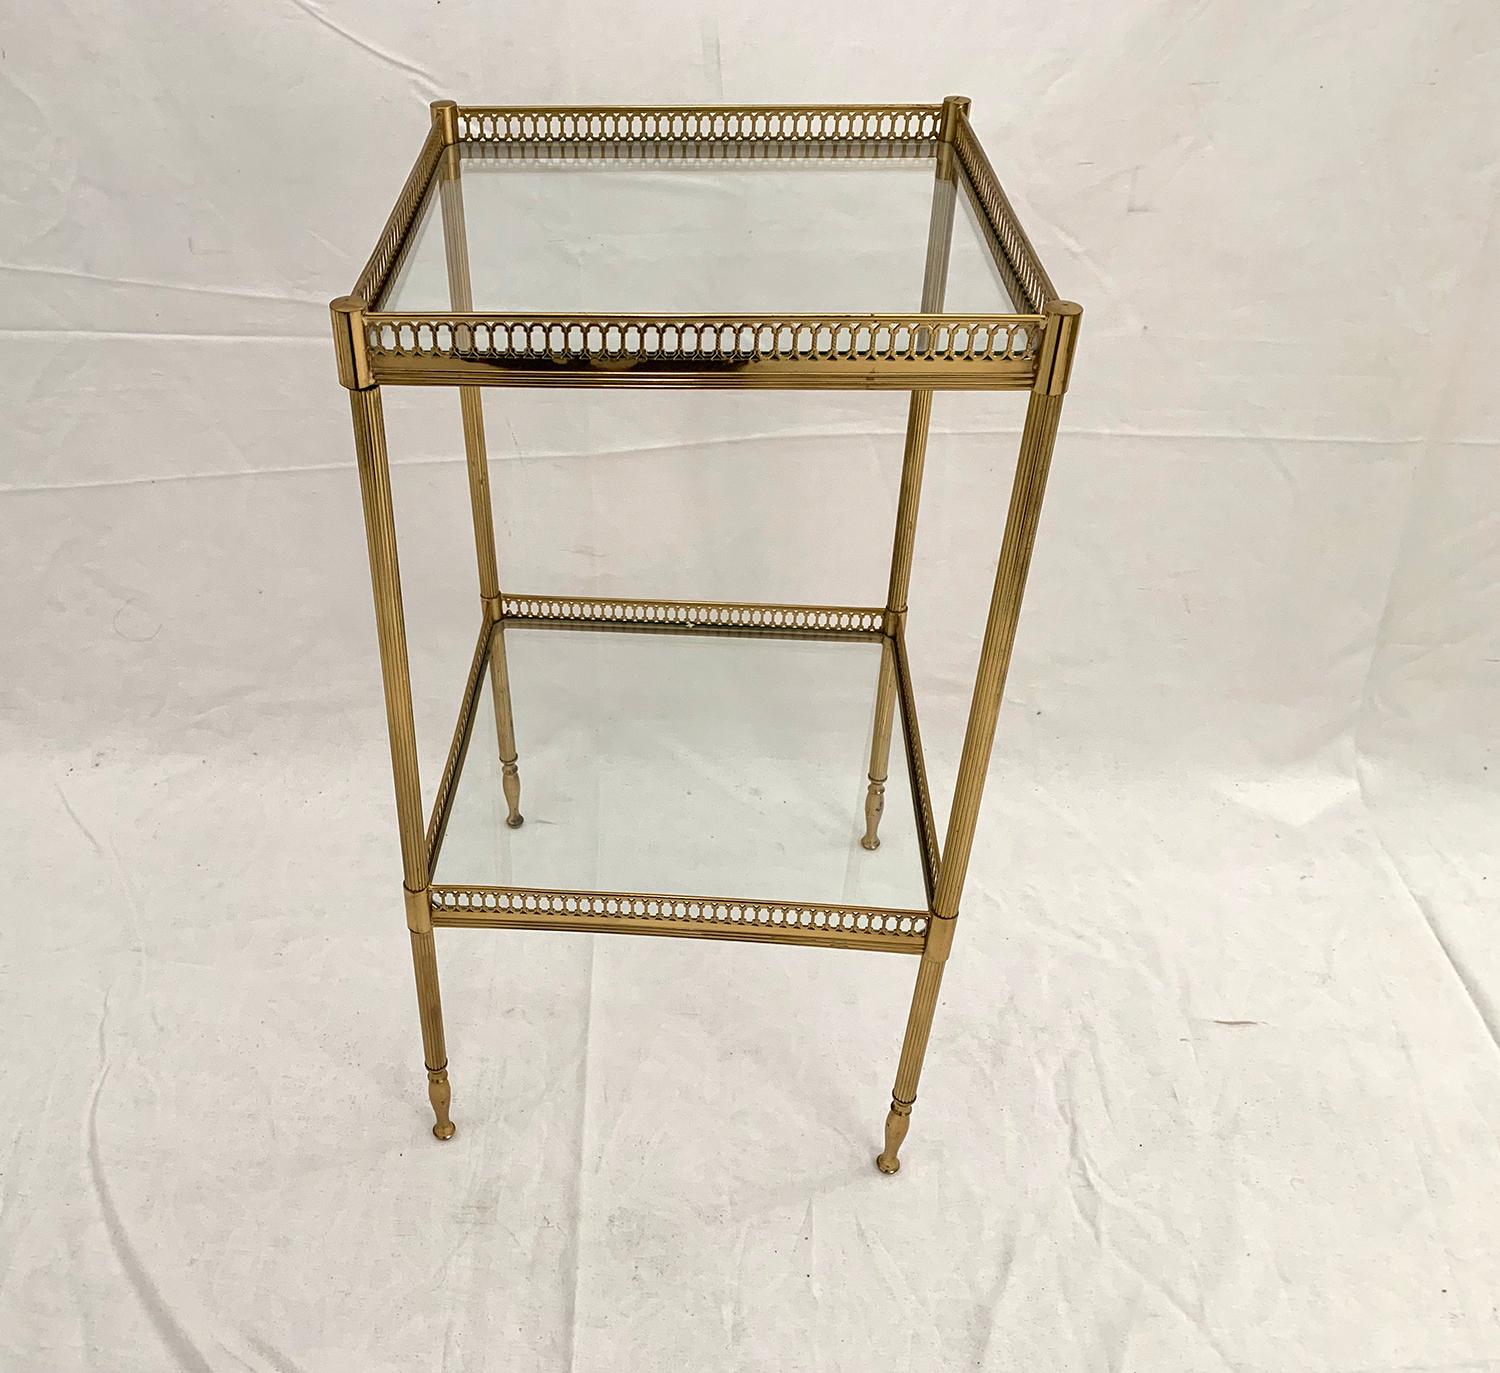 brass and glass end tables